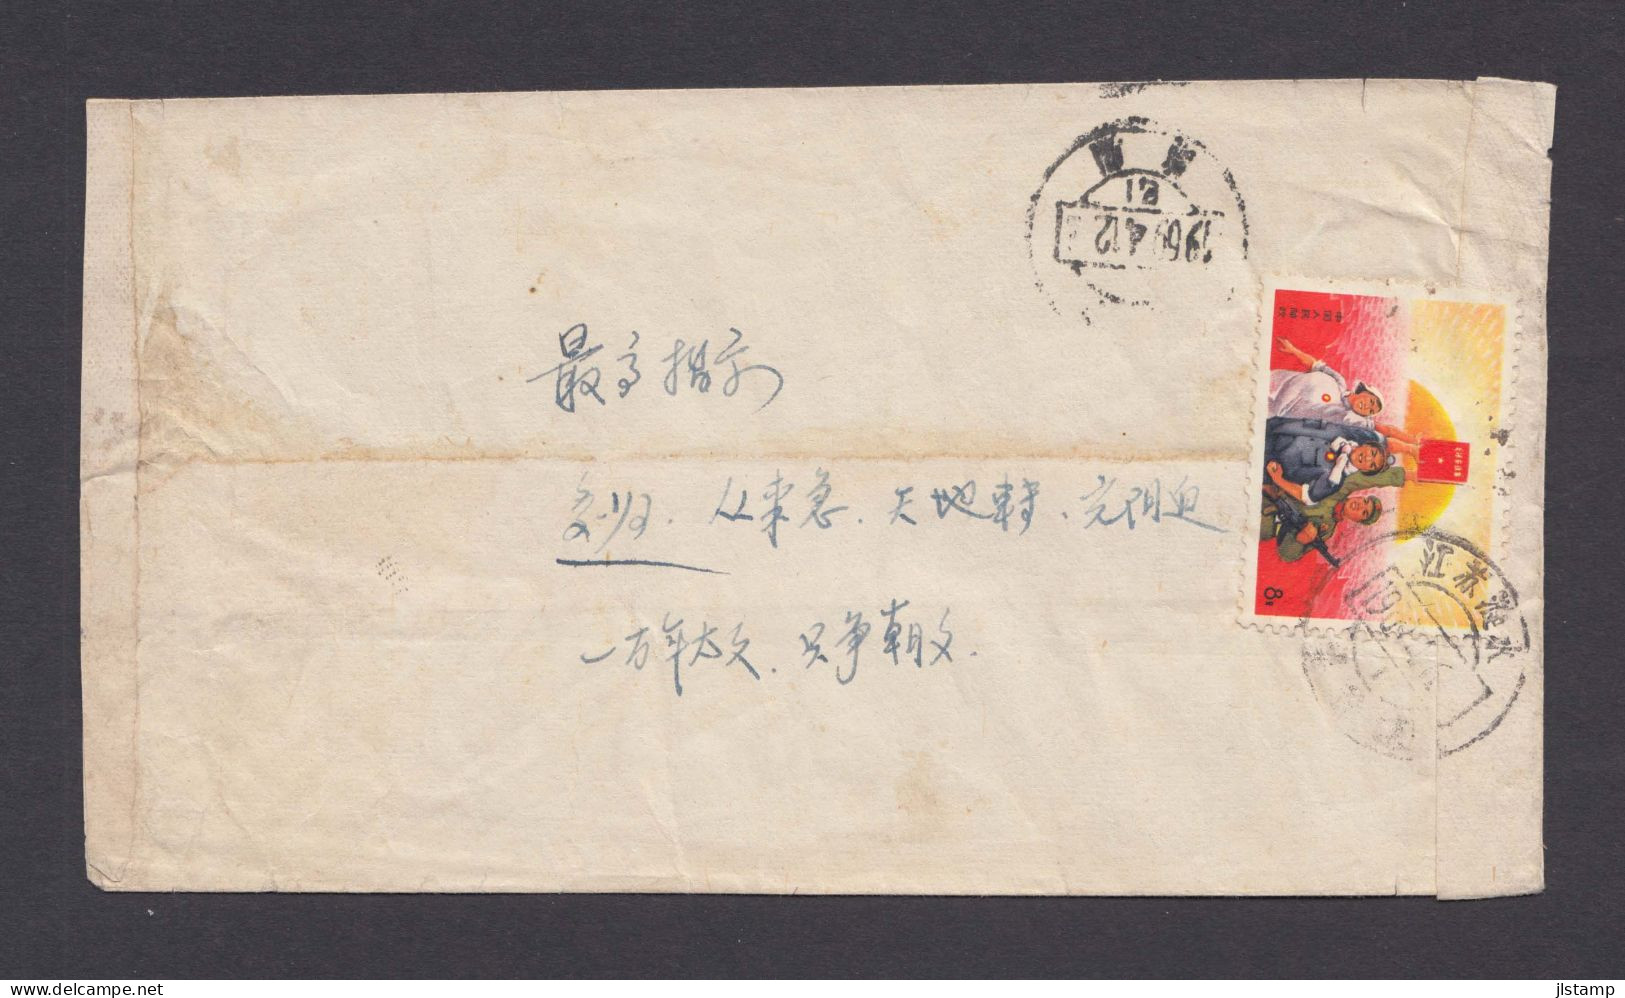 Rare China Cultural Revolution Period Cover,1969 From Lianshui To Jinzhou,Scott#1000,VF - Covers & Documents